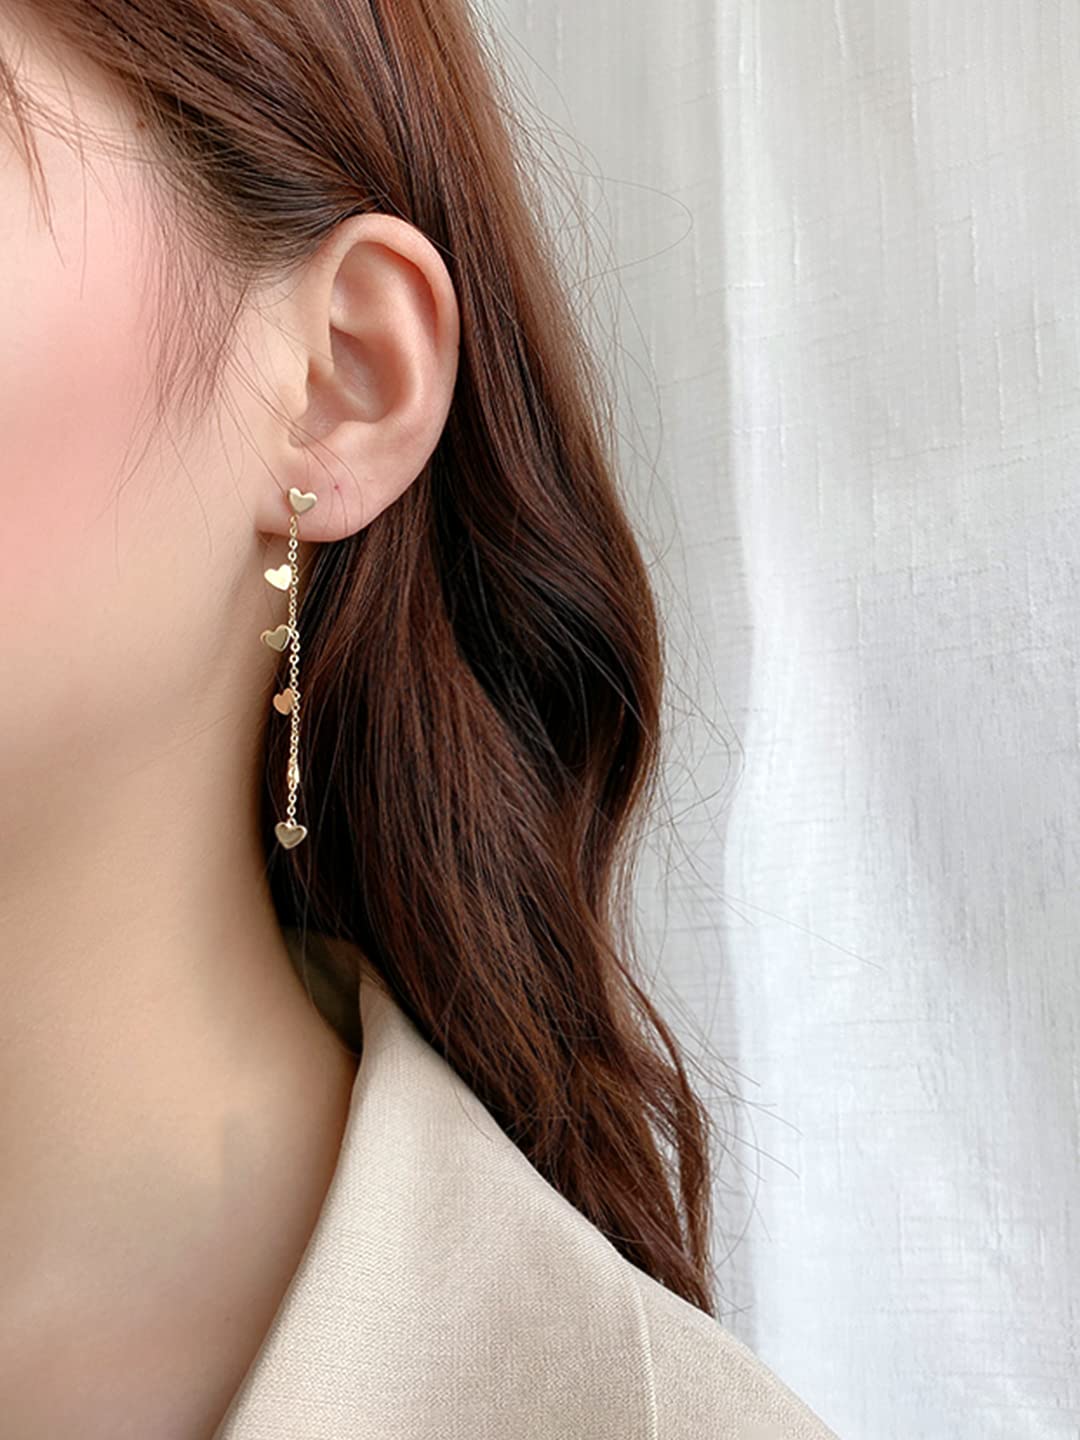 Yellow Chimes Earrings for Women and Girls Pearl Dangler | Gold Toned Heart Designed Long Danglers Earrings | Birthday Gift for girls and women Anniversary Gift for Wife